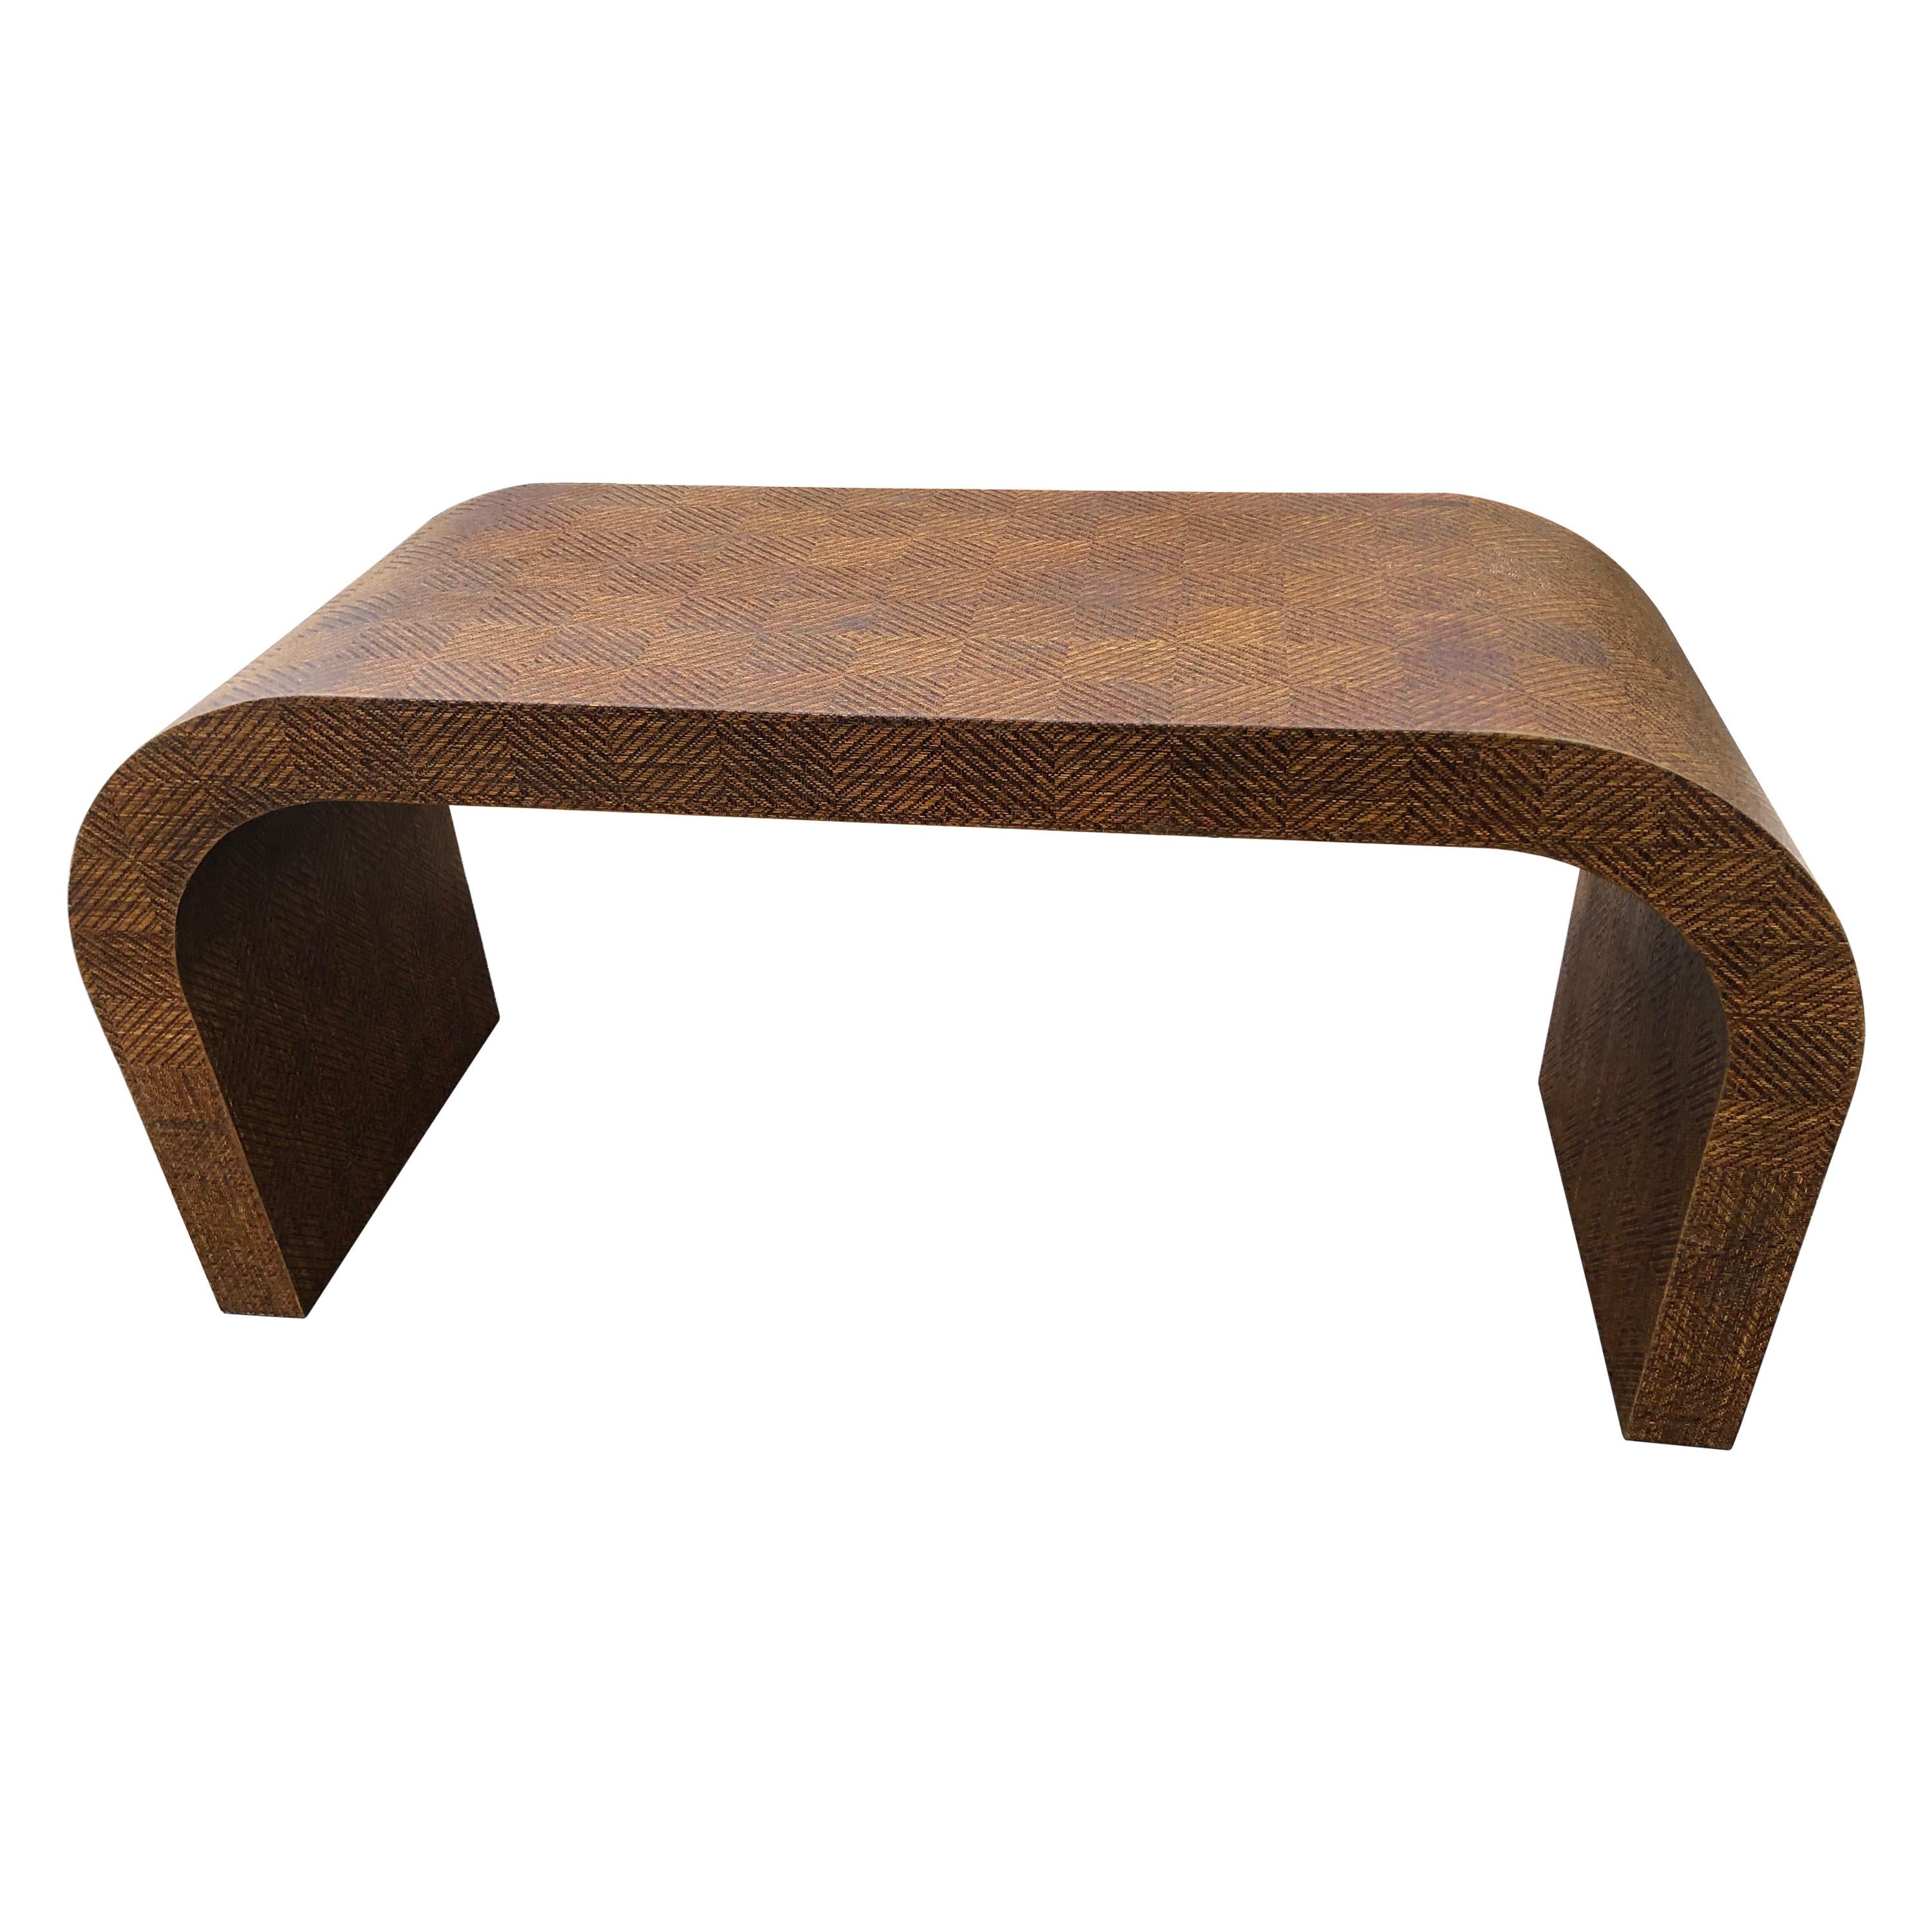 Vintage Seagrass Waterfall Console Table